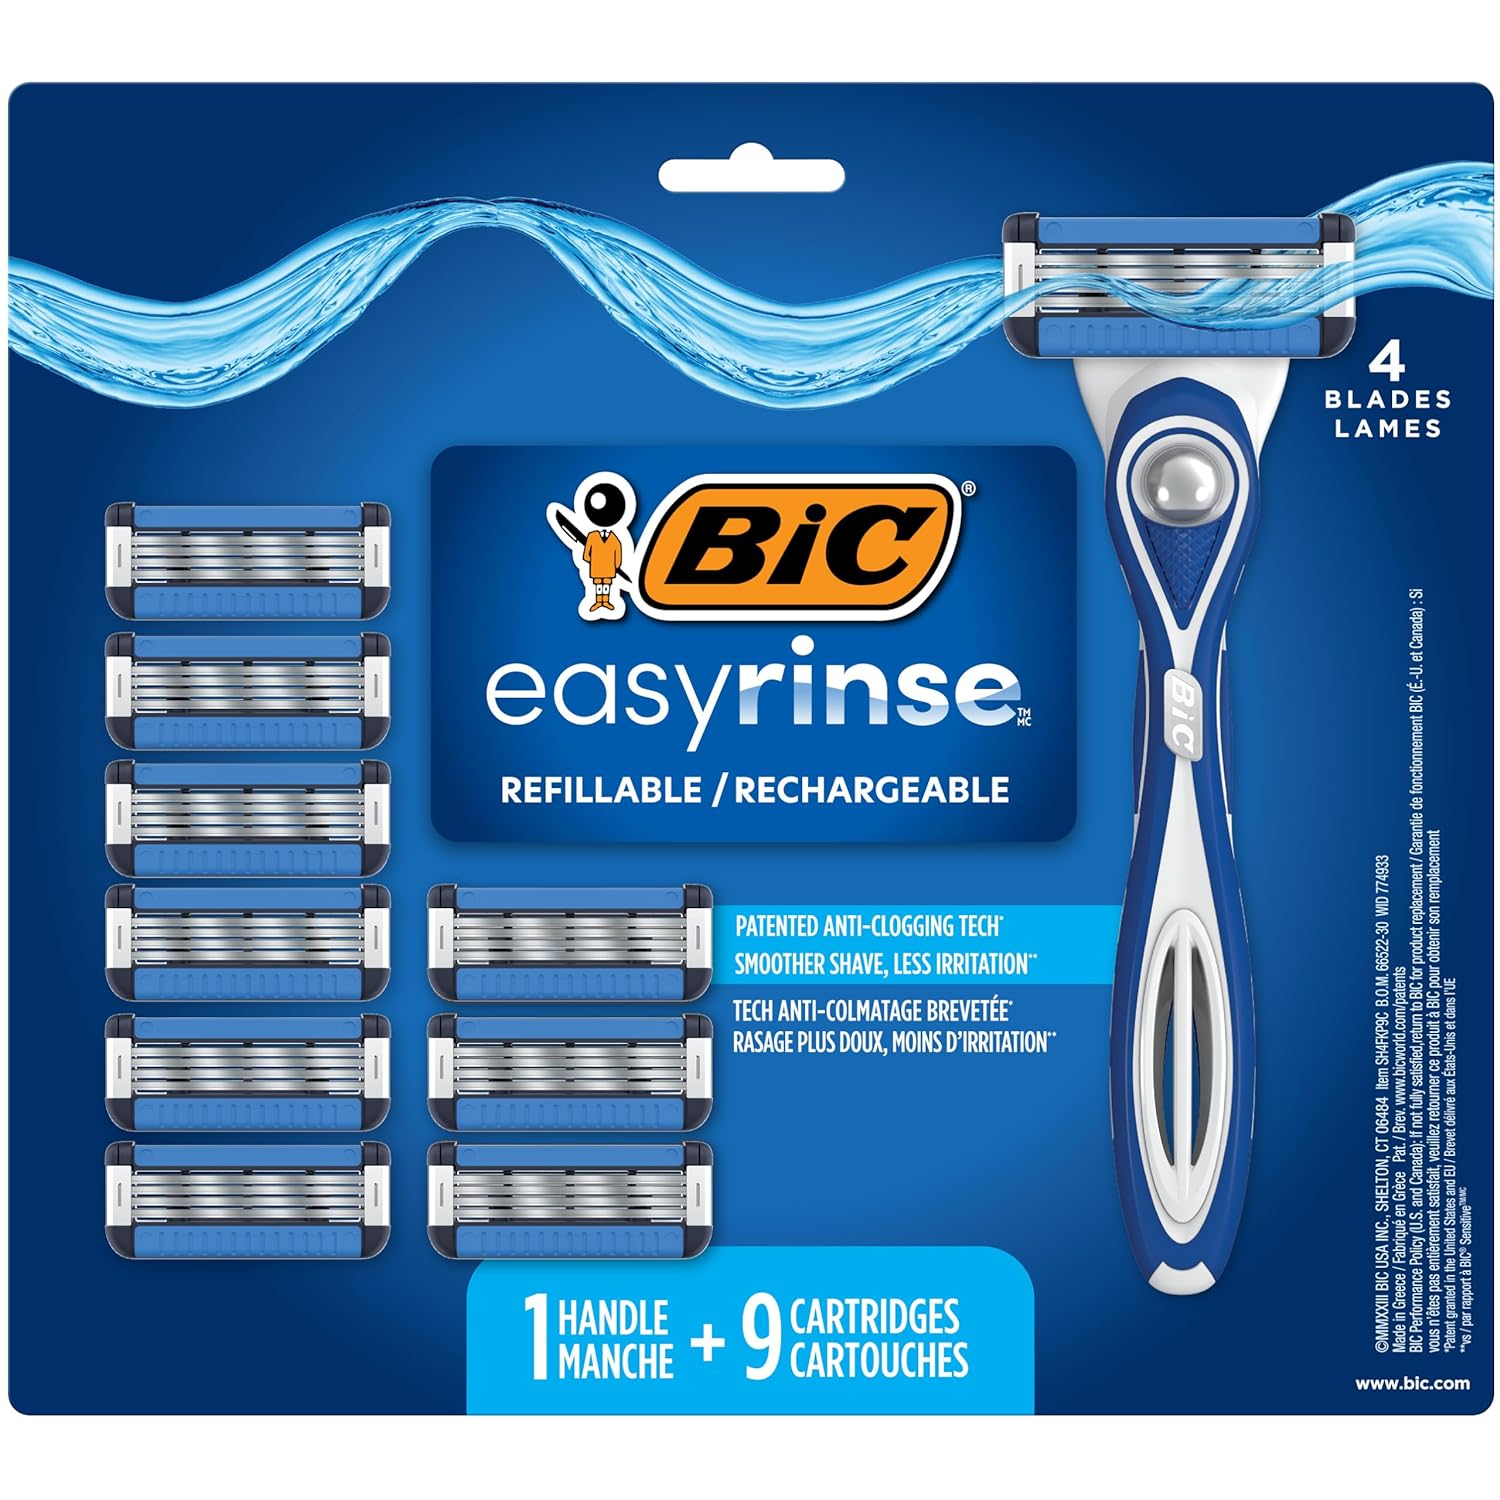 Ive used Bic razors for years, as its a well known trusted brand. I love these new anti clogging blades, that dont fill up as fast. Bics always given me a close, smooth shave. I love that theres 9 refills in this pack, these should last me awhile. As I would expect, its a good razor.